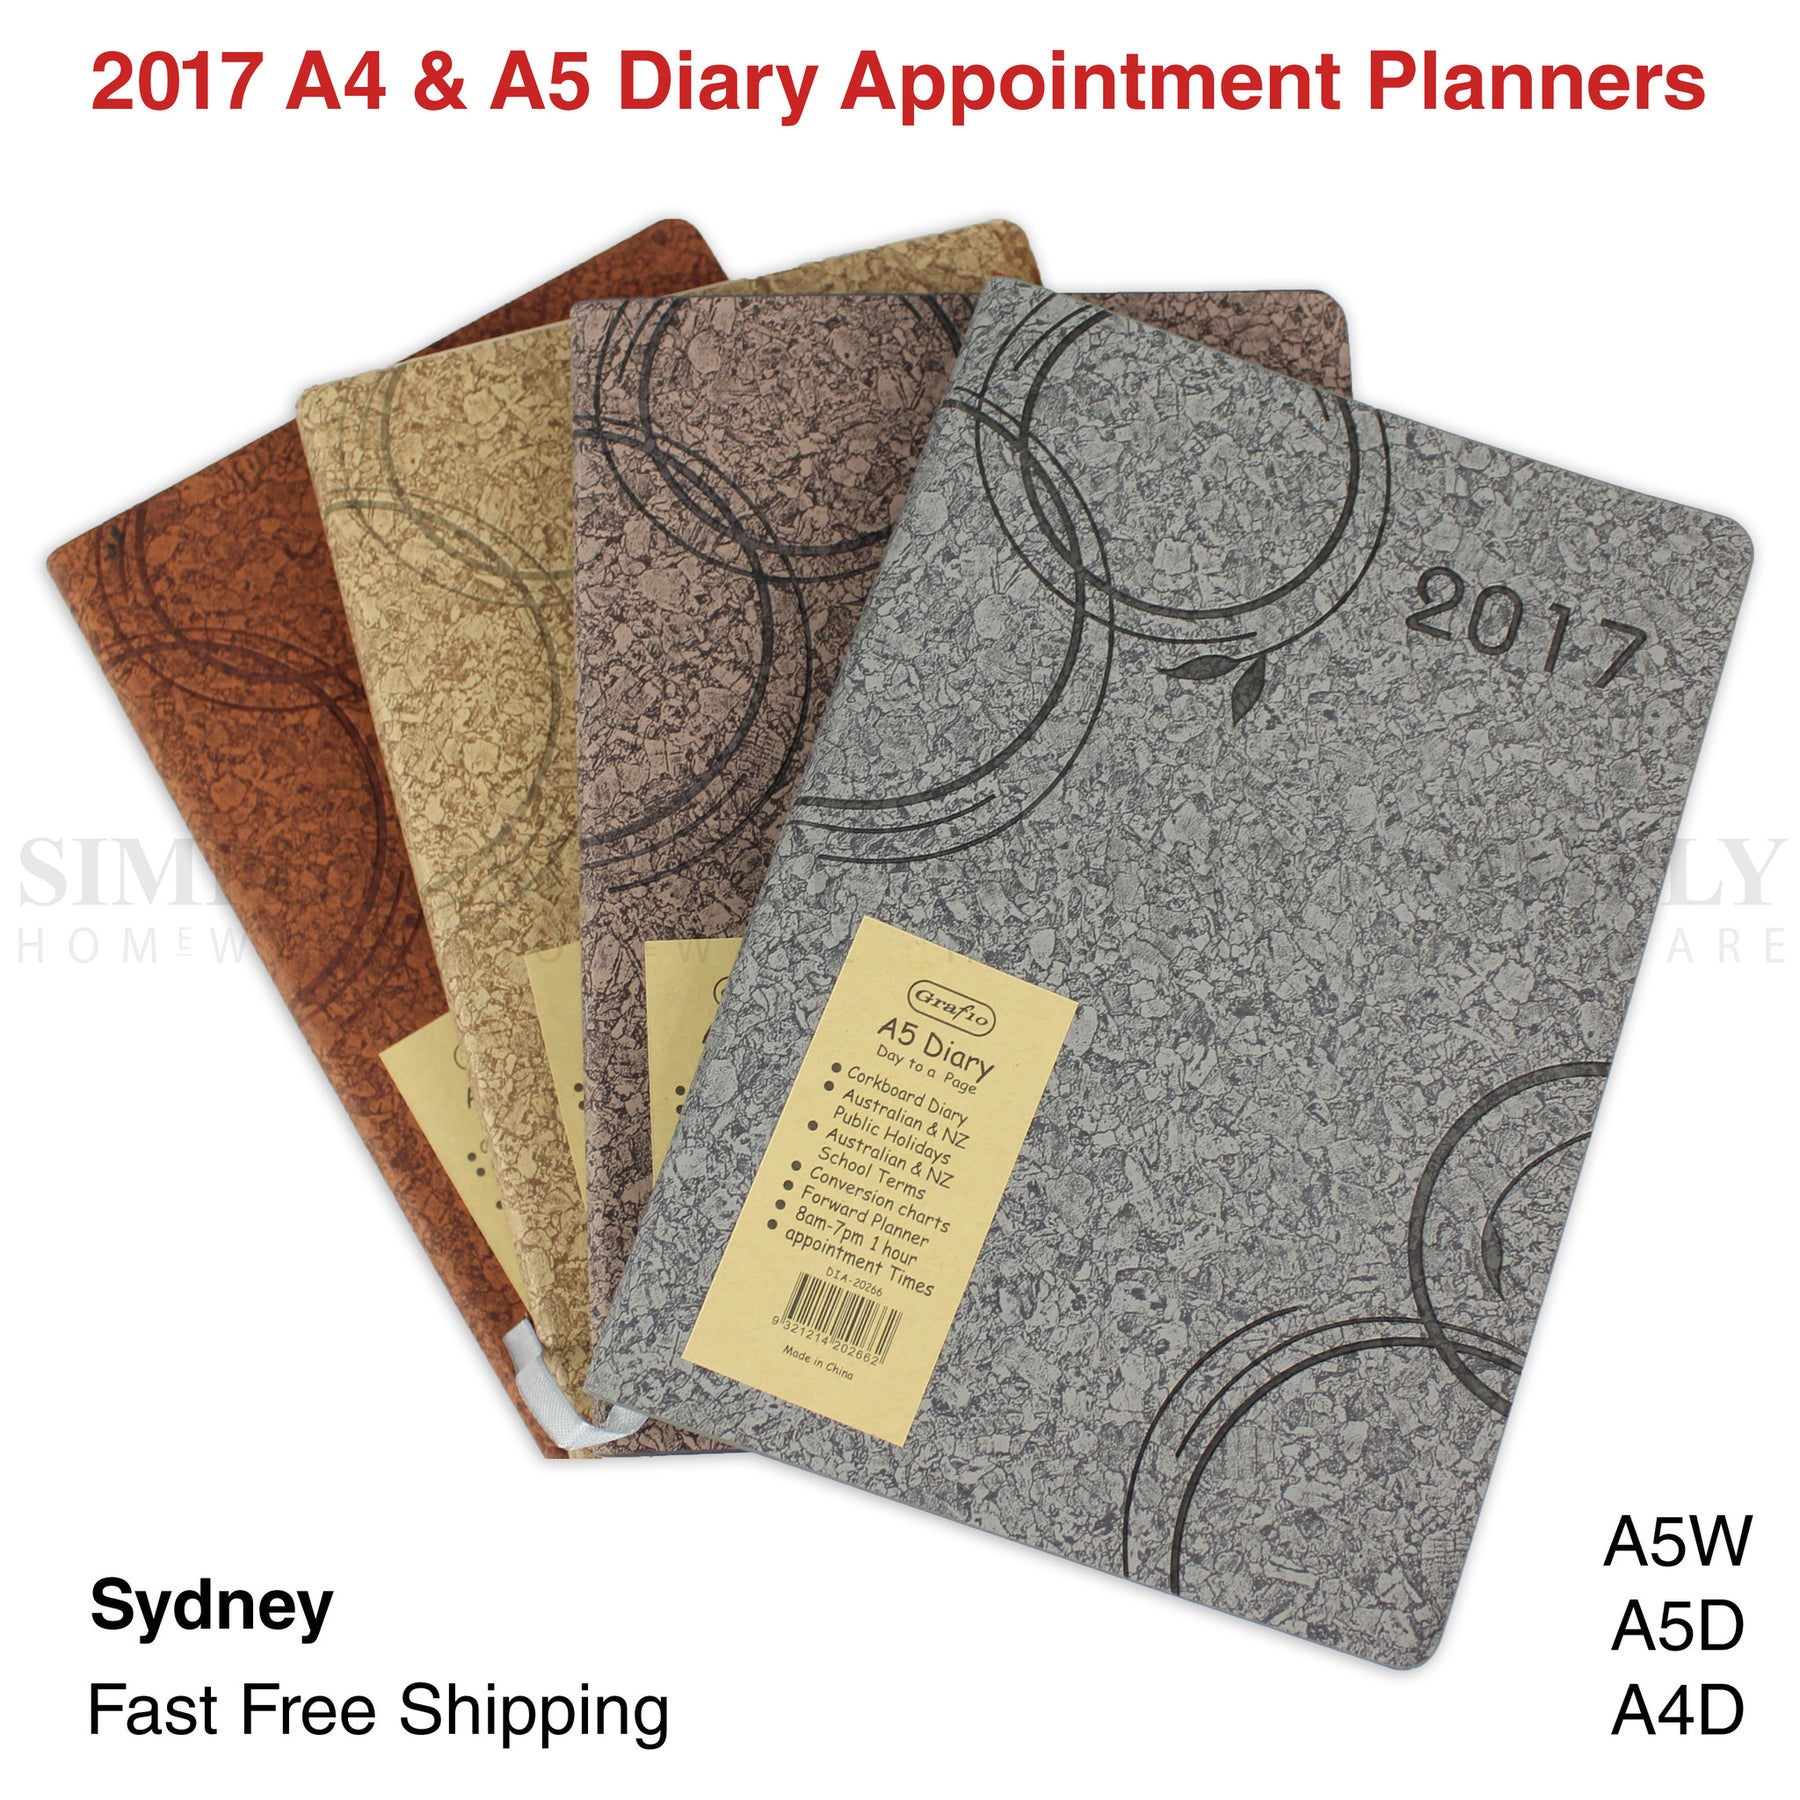 2017 Diaries Now Available